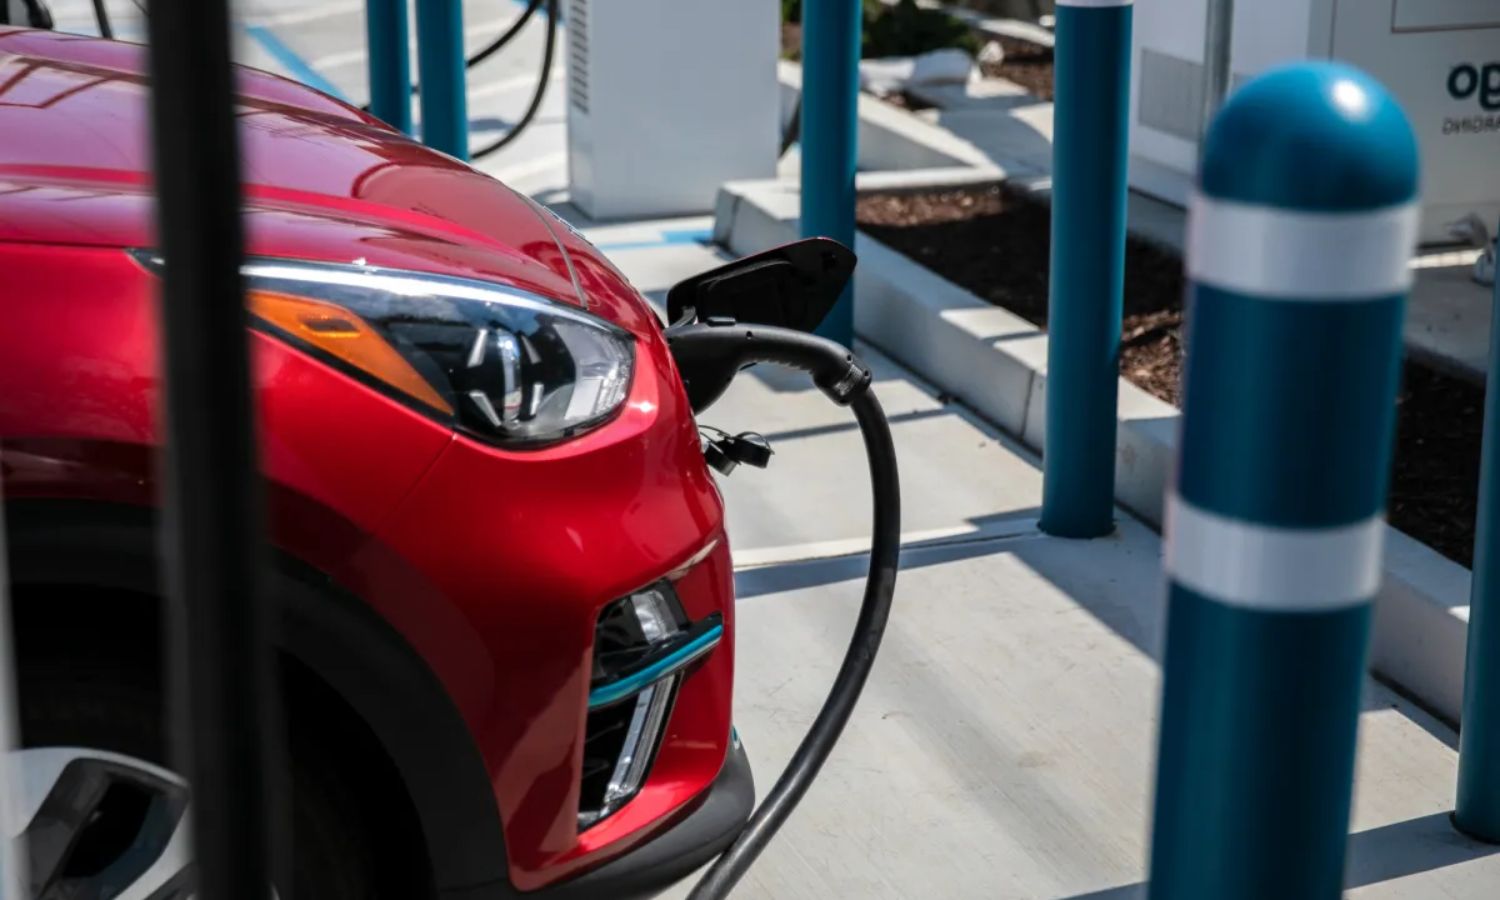 San Jose Ready for an Electric Vehicle